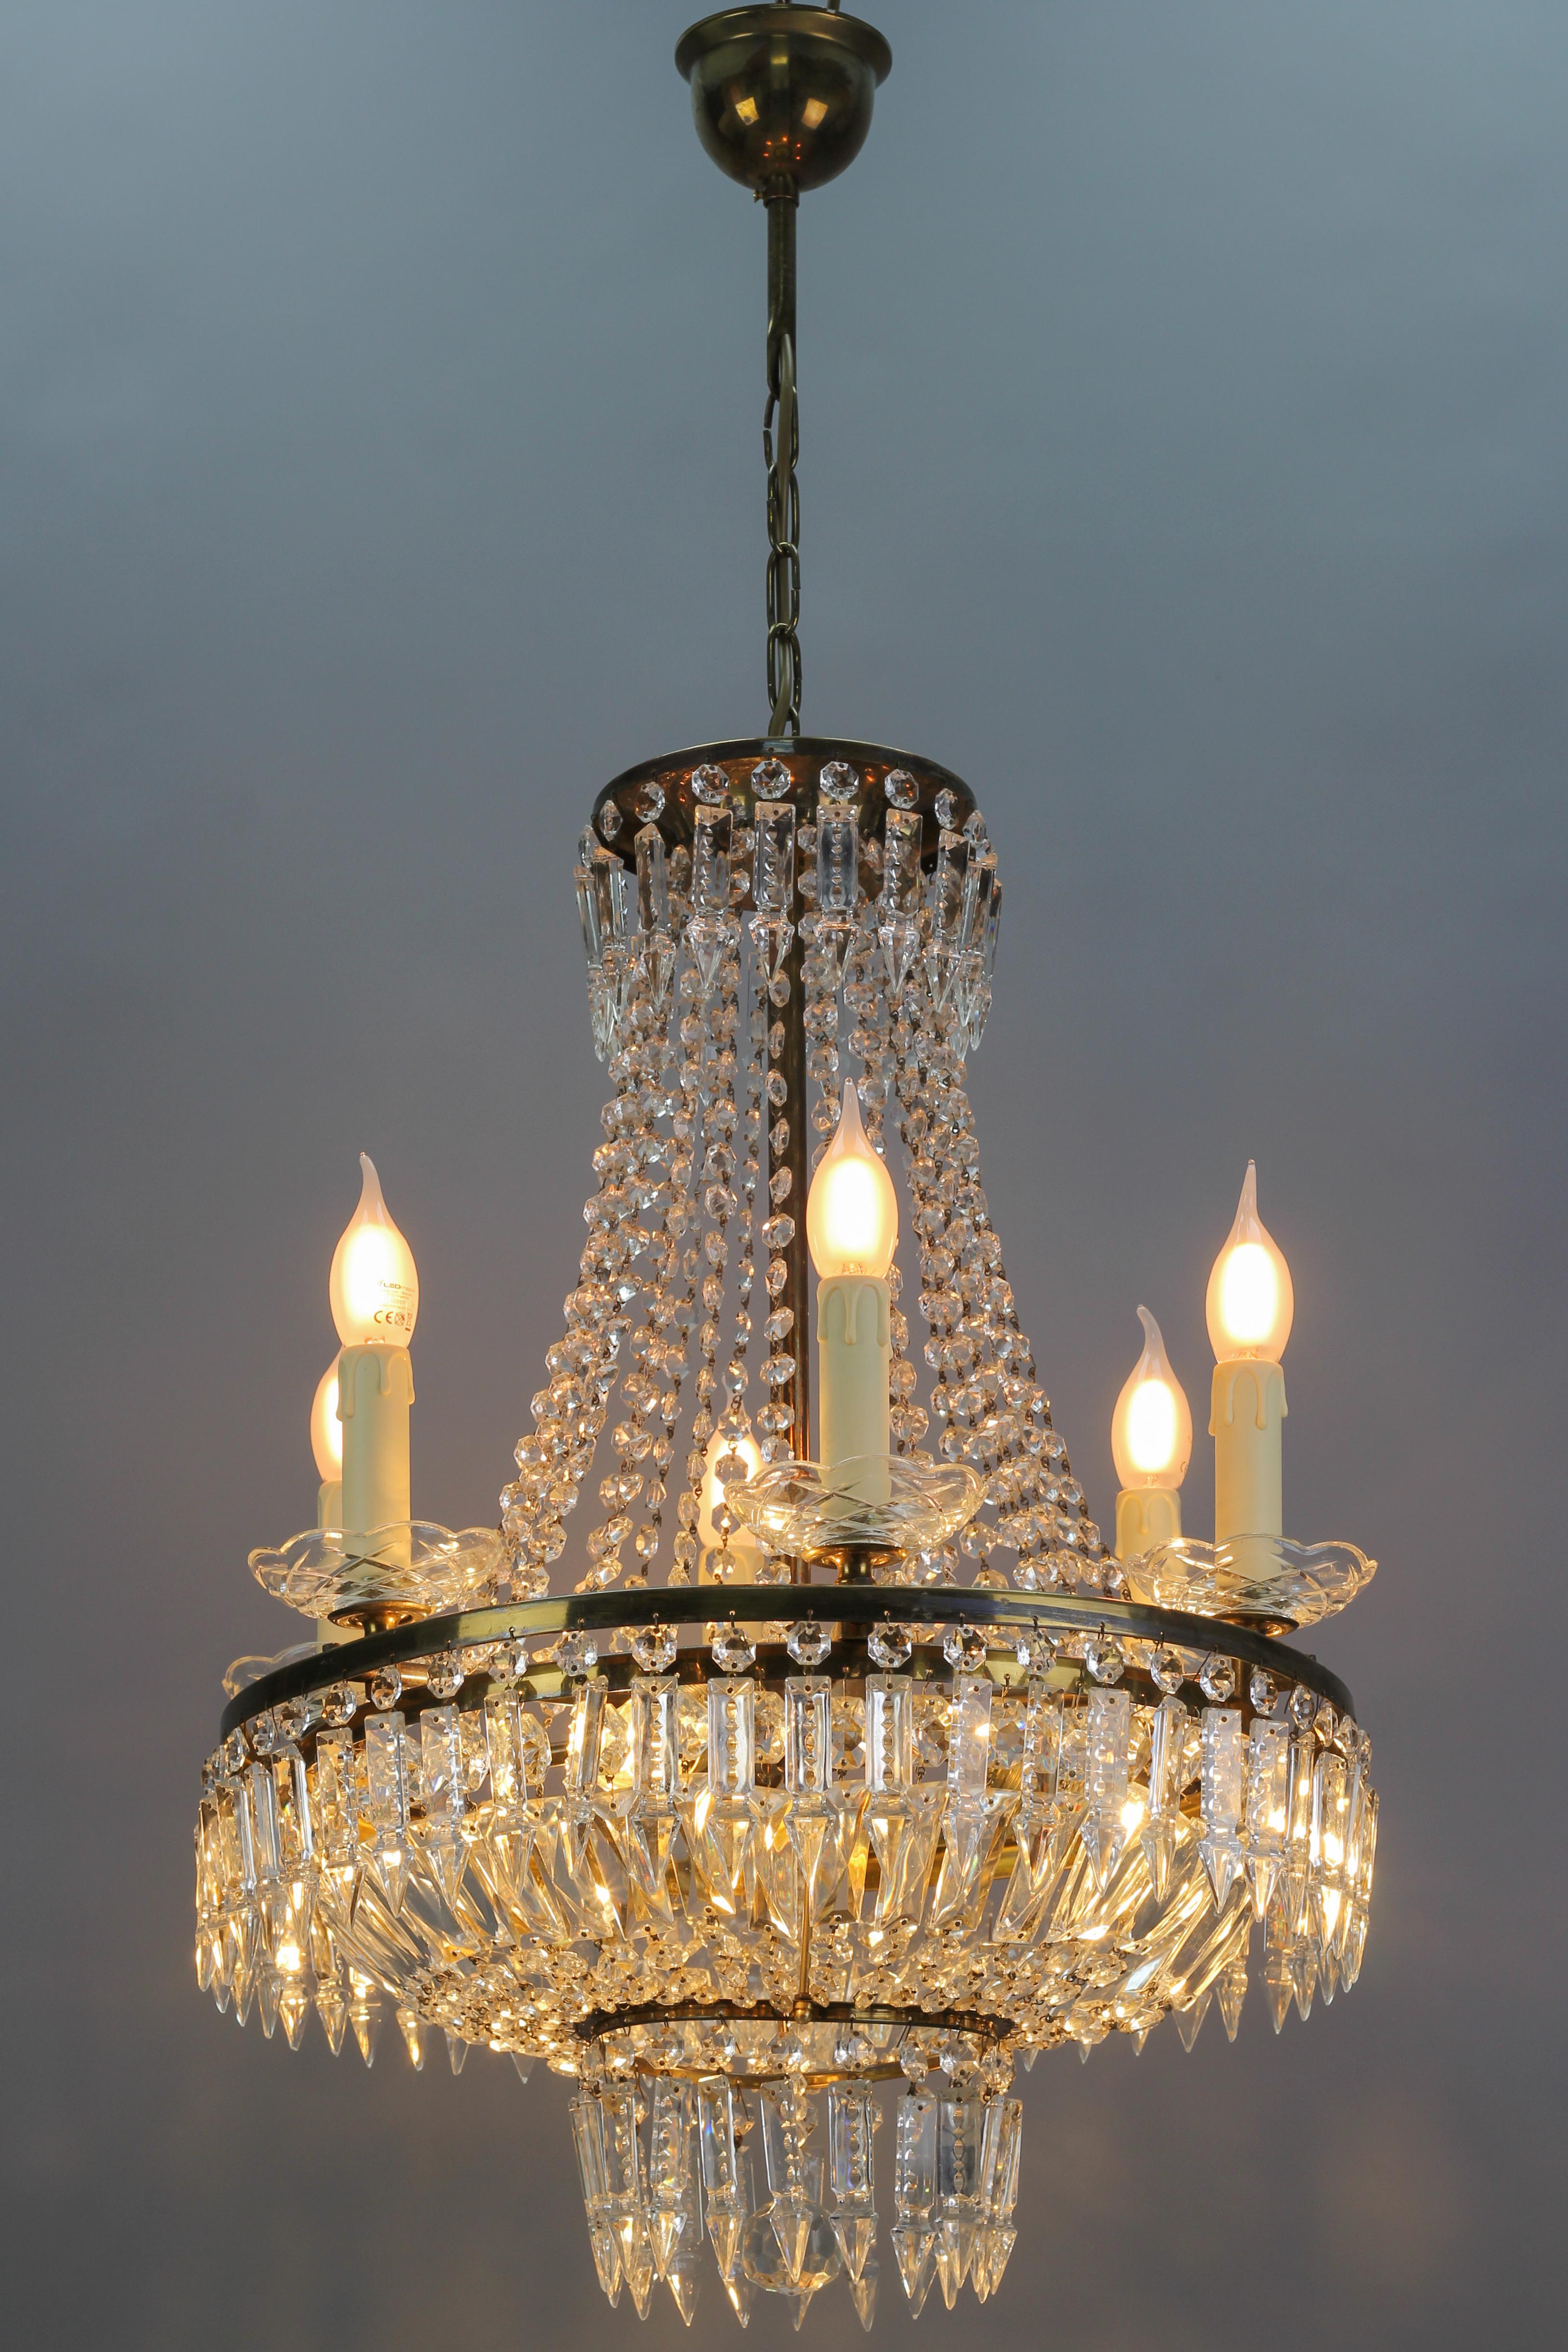 French Art Deco style crystal glass basket-shaped chandelier features six external and three internal lights. This beautiful piece has a brass frame hung with chains of crystal glass beads and prisms forming a basket shape and reflecting the light